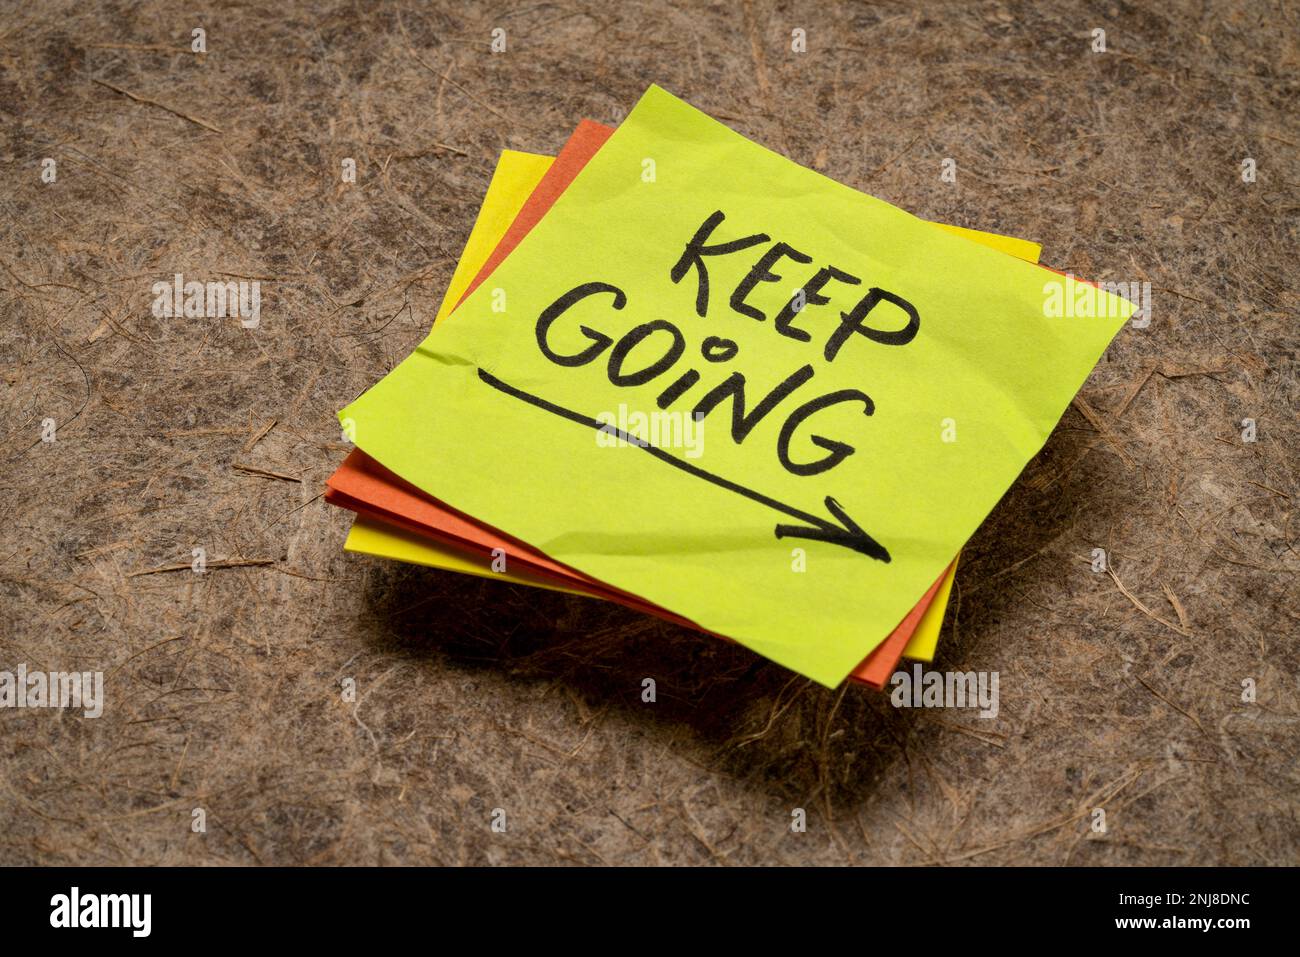 keep going - motivation or determination concept - handwriting on a sticky note Stock Photo